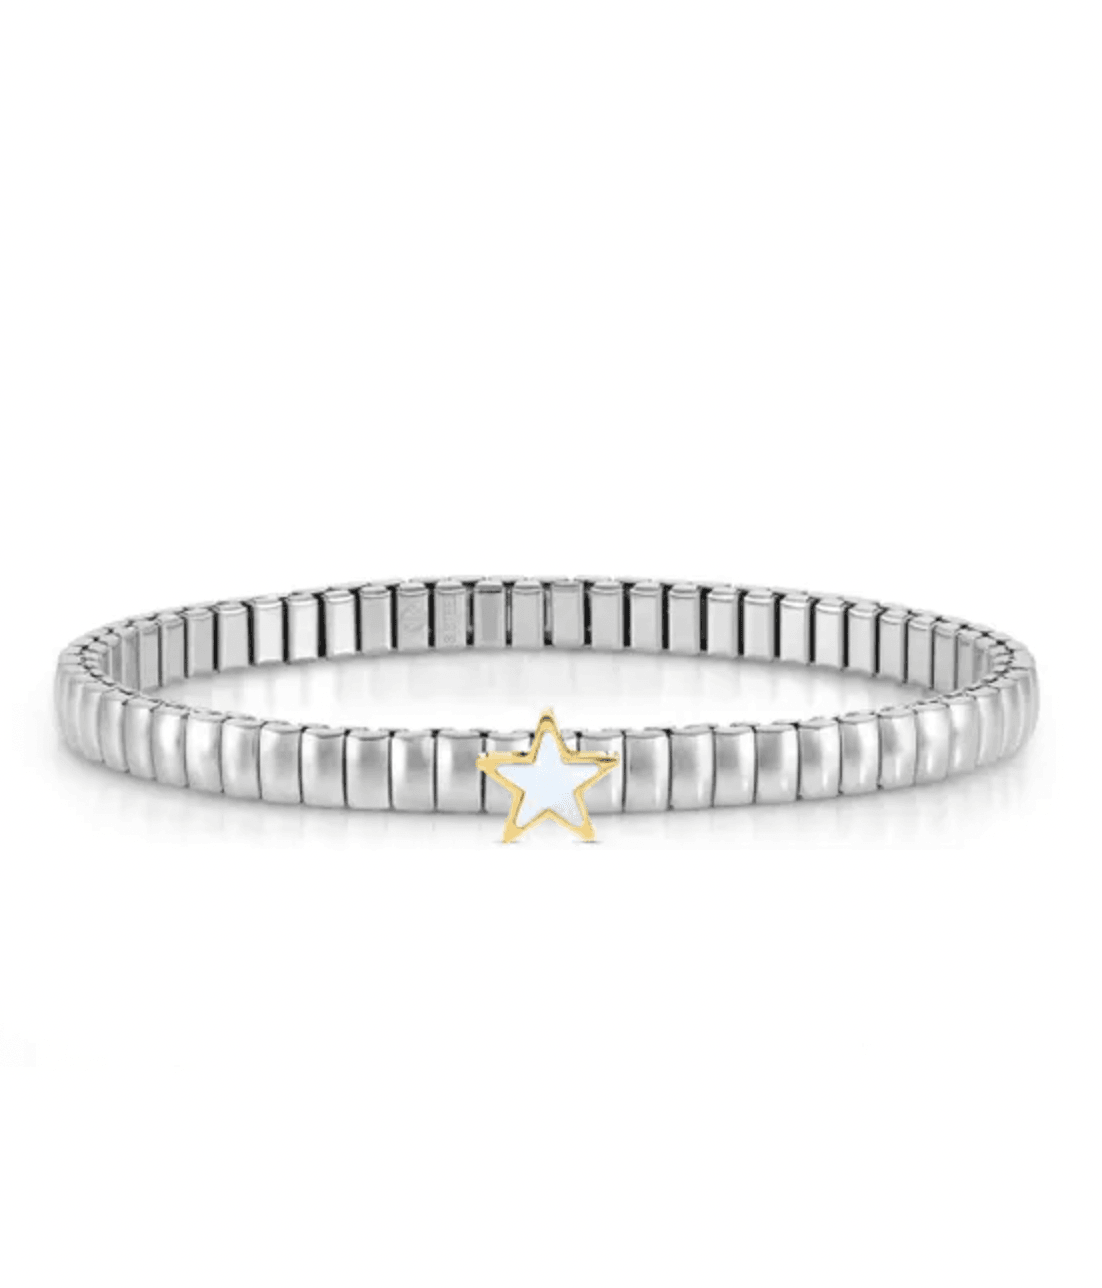 EXTENSION STAINLESS STEEL BRACELET, MOTHER OF PEARL STAR